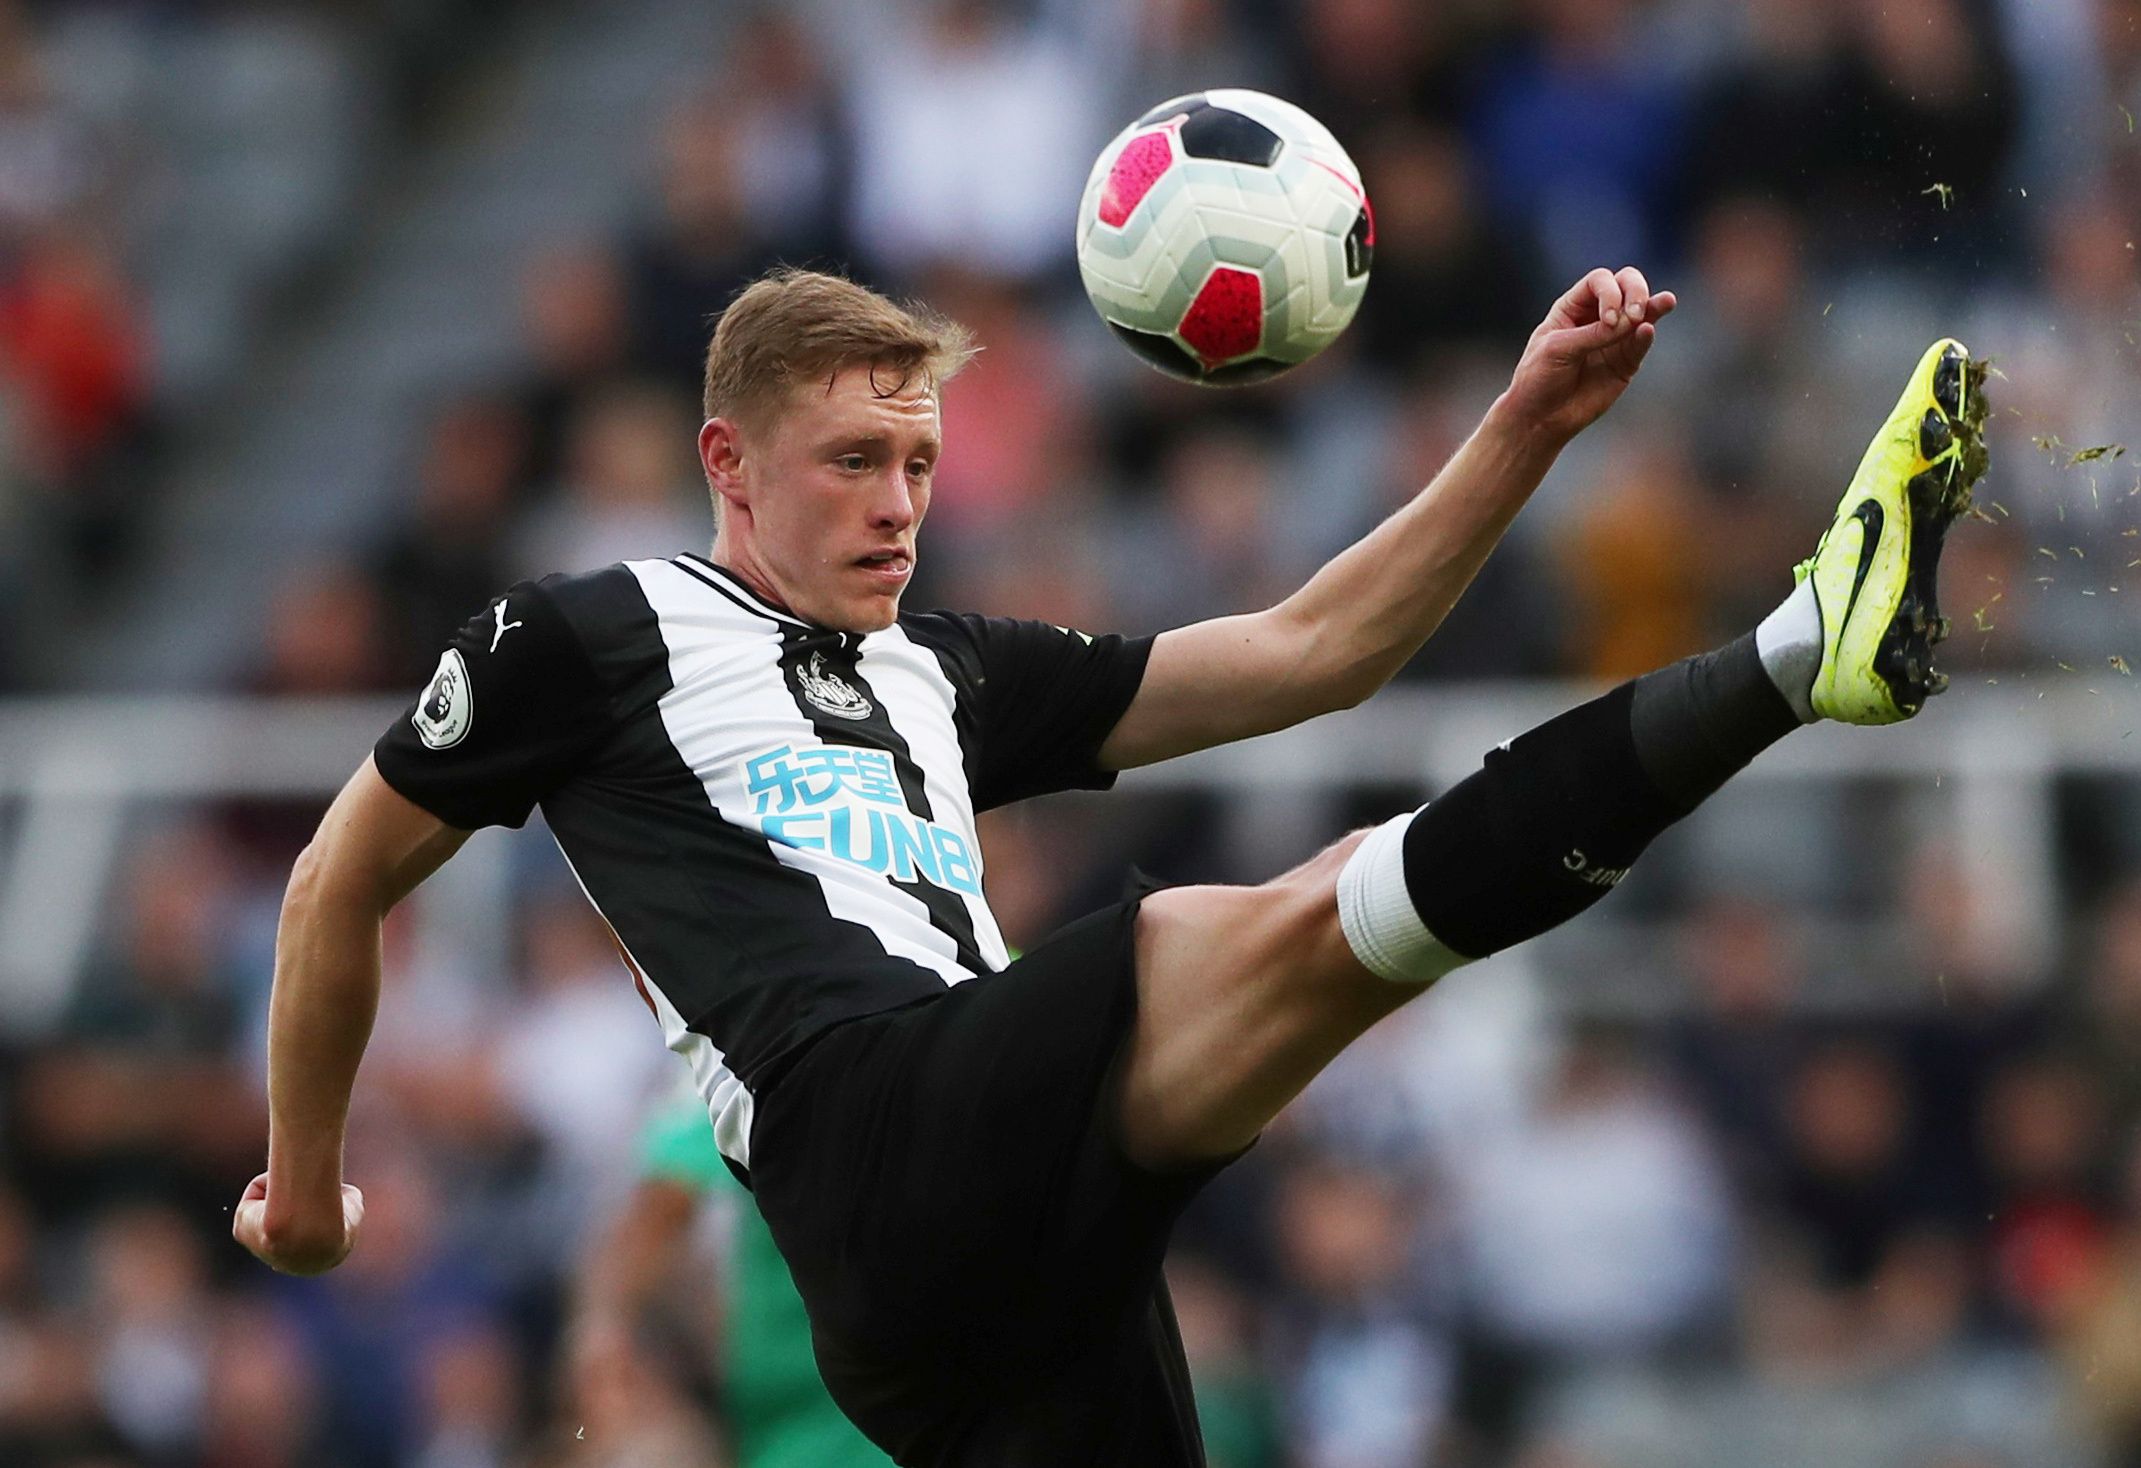 Soccer Football - Premier League - Newcastle United v Watford - St James' Park, Newcastle, Britain - August 31, 2019  Newcastle United's Sean Longstaff in action  REUTERS/Scott Heppell  EDITORIAL USE ONLY. No use with unauthorized audio, video, data, fixture lists, club/league logos or 